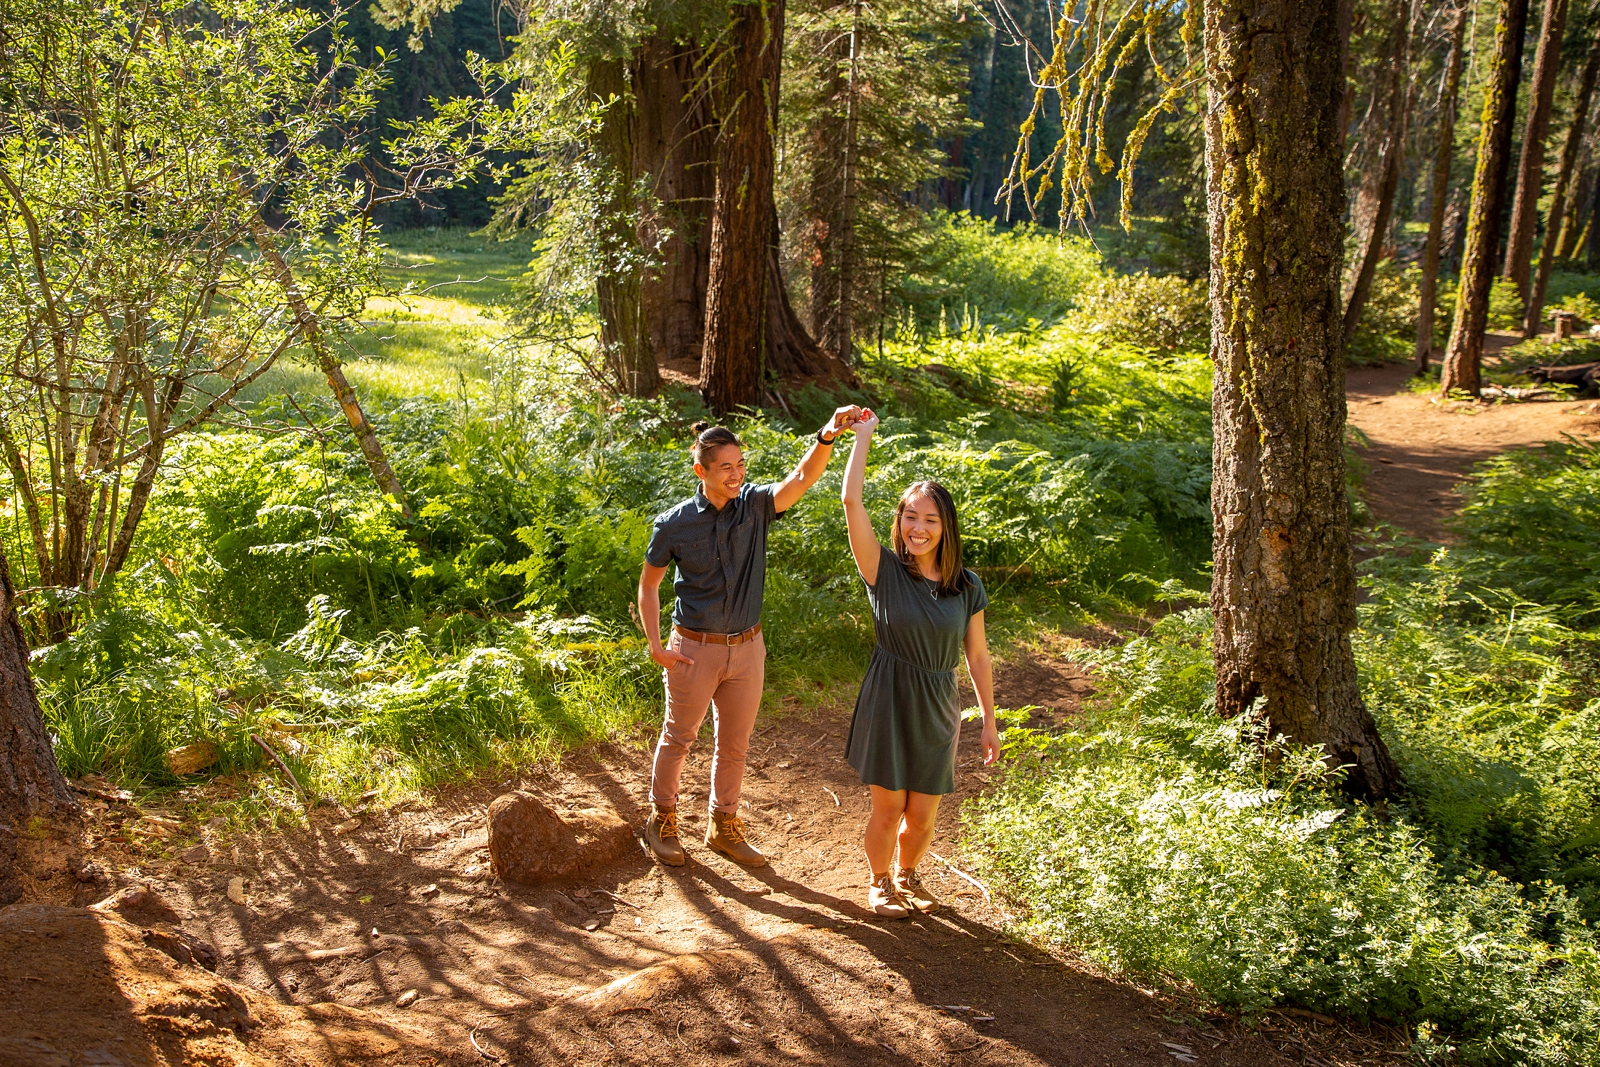 This couple got engaged at Sequoia National Park.